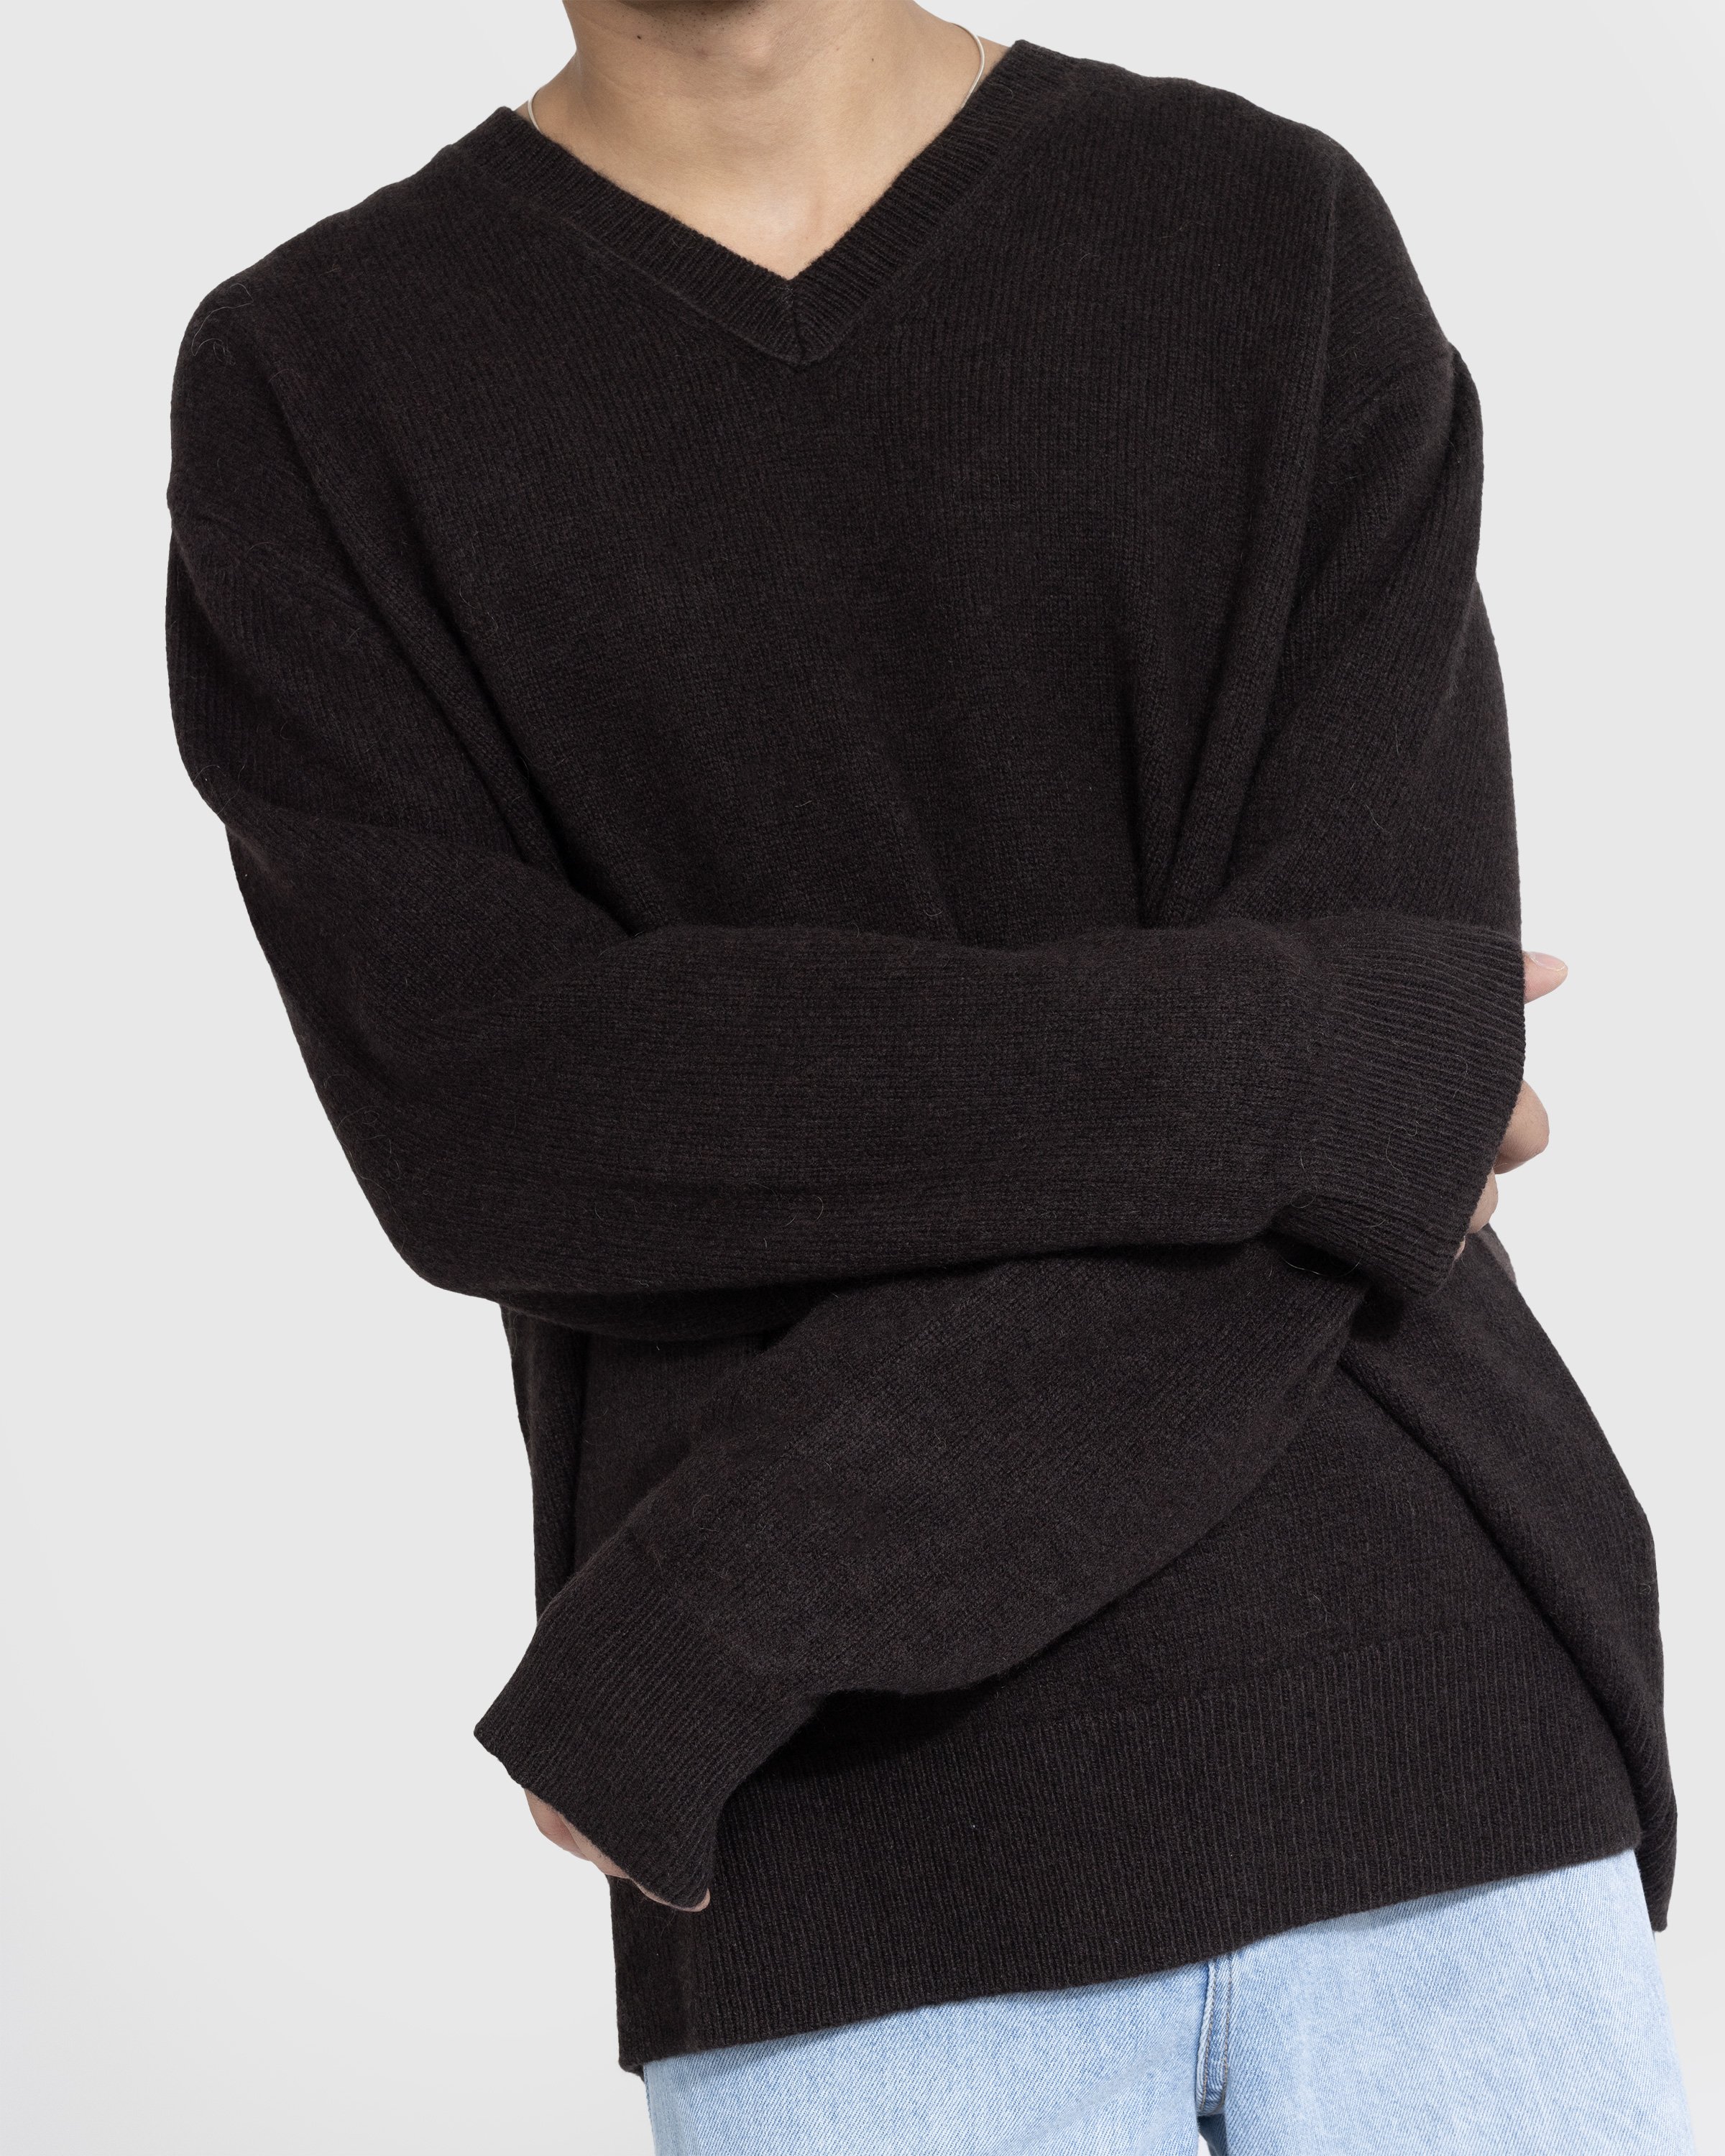 Acne Studios - Wool V-Neck Sweater Brown - Clothing - Brown - Image 4